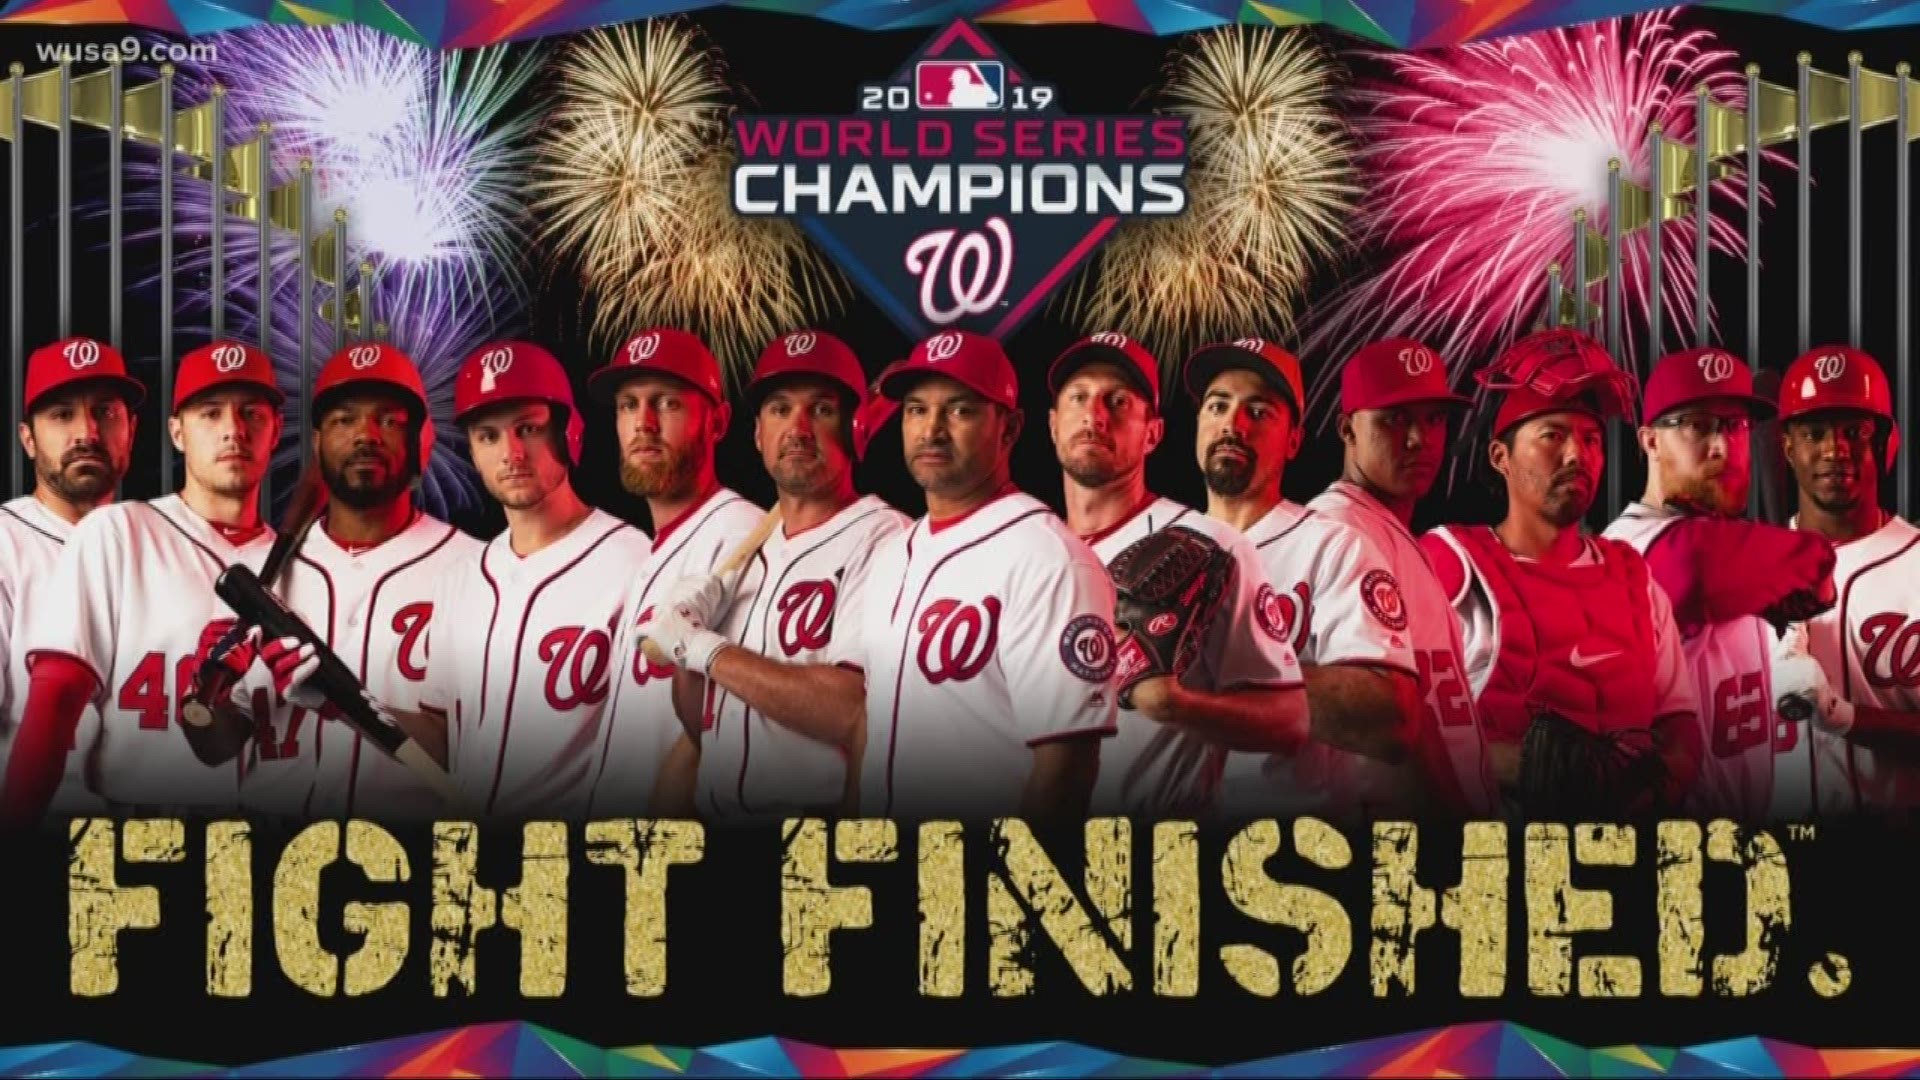 The Washington Nationals win the World Series against the Houston Astros.